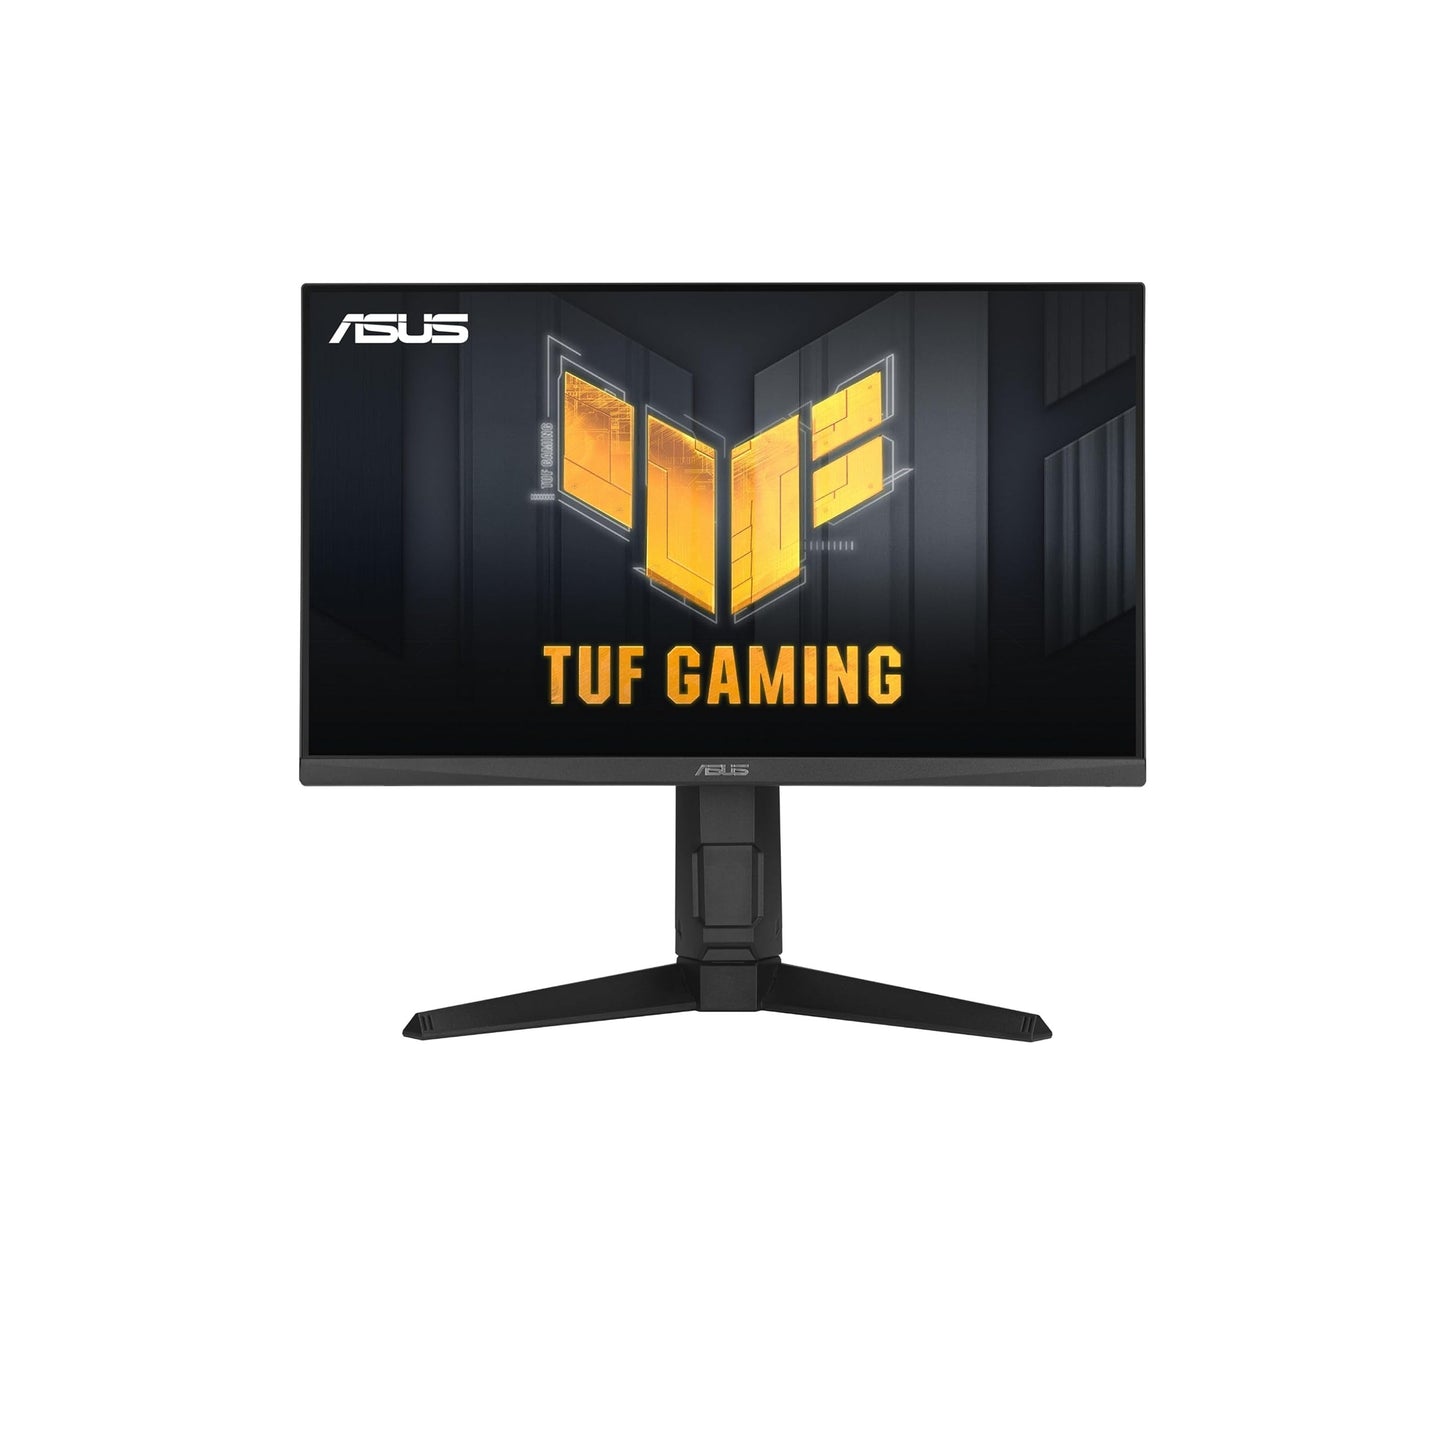 ASUS TUF Gaming 24” (23.8” viewable) 1080P Monitor (VG249QL3A) - Full HD, 180Hz, 1ms, Fast IPS, ELMB, FreeSync Premium, G-SYNC Compatible, Speakers, DisplayPort, Height Adjustable